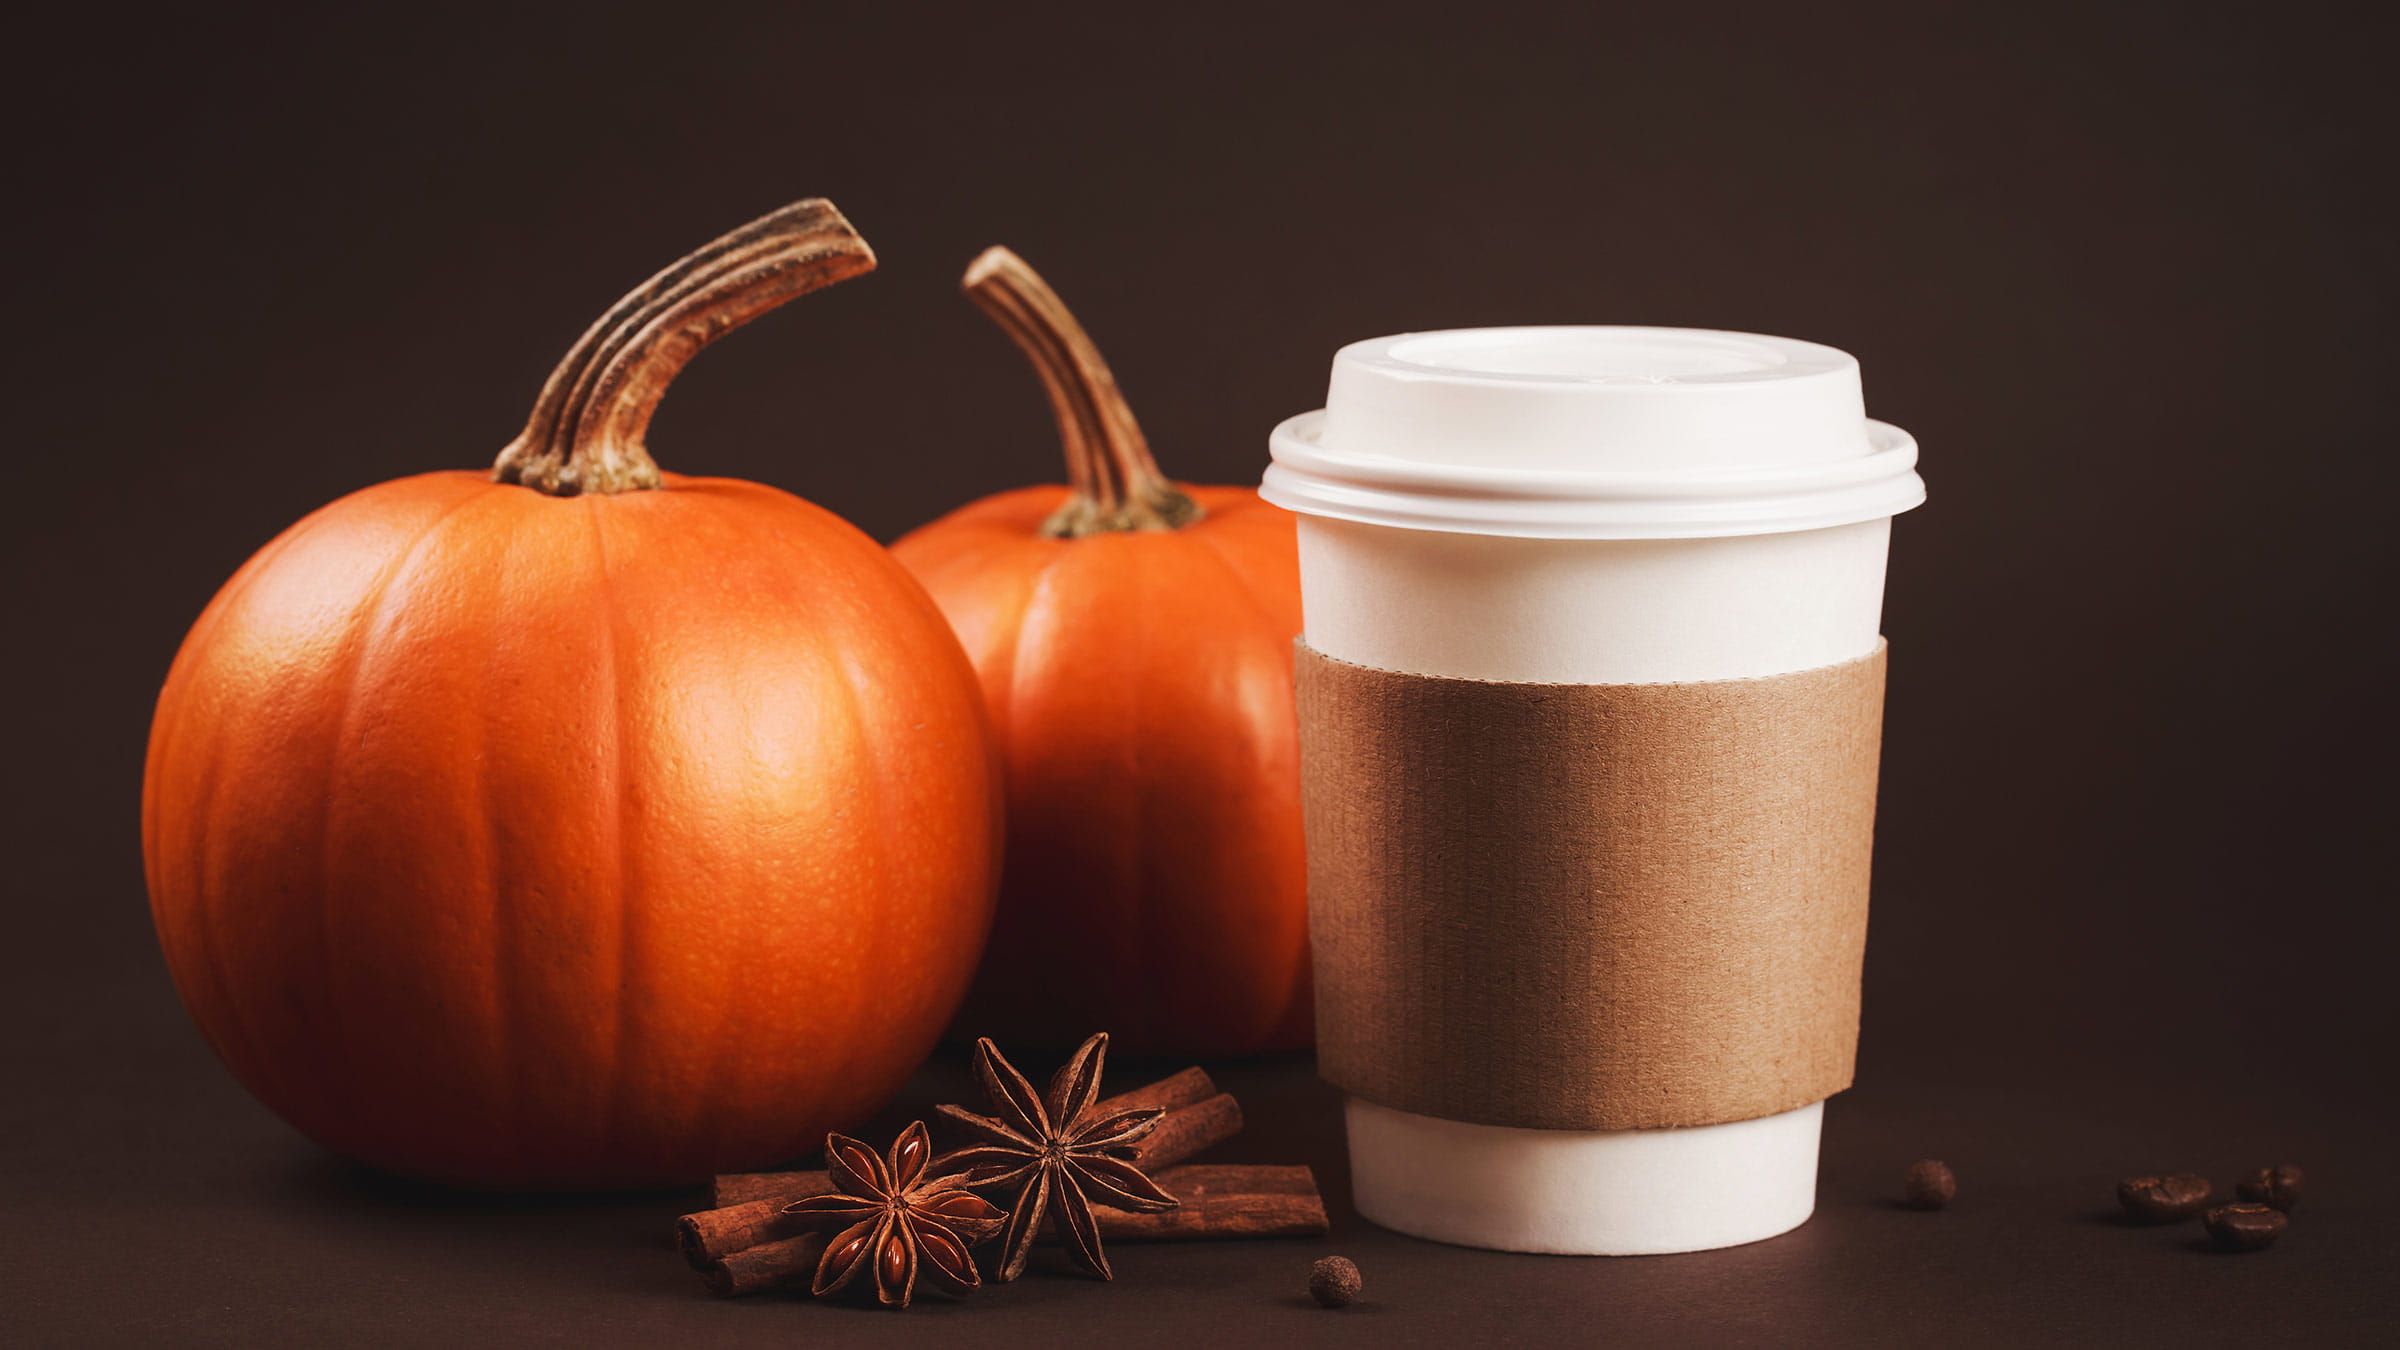 Recipe from our chefs: How to make your own sugar-free pumpkin spice latte